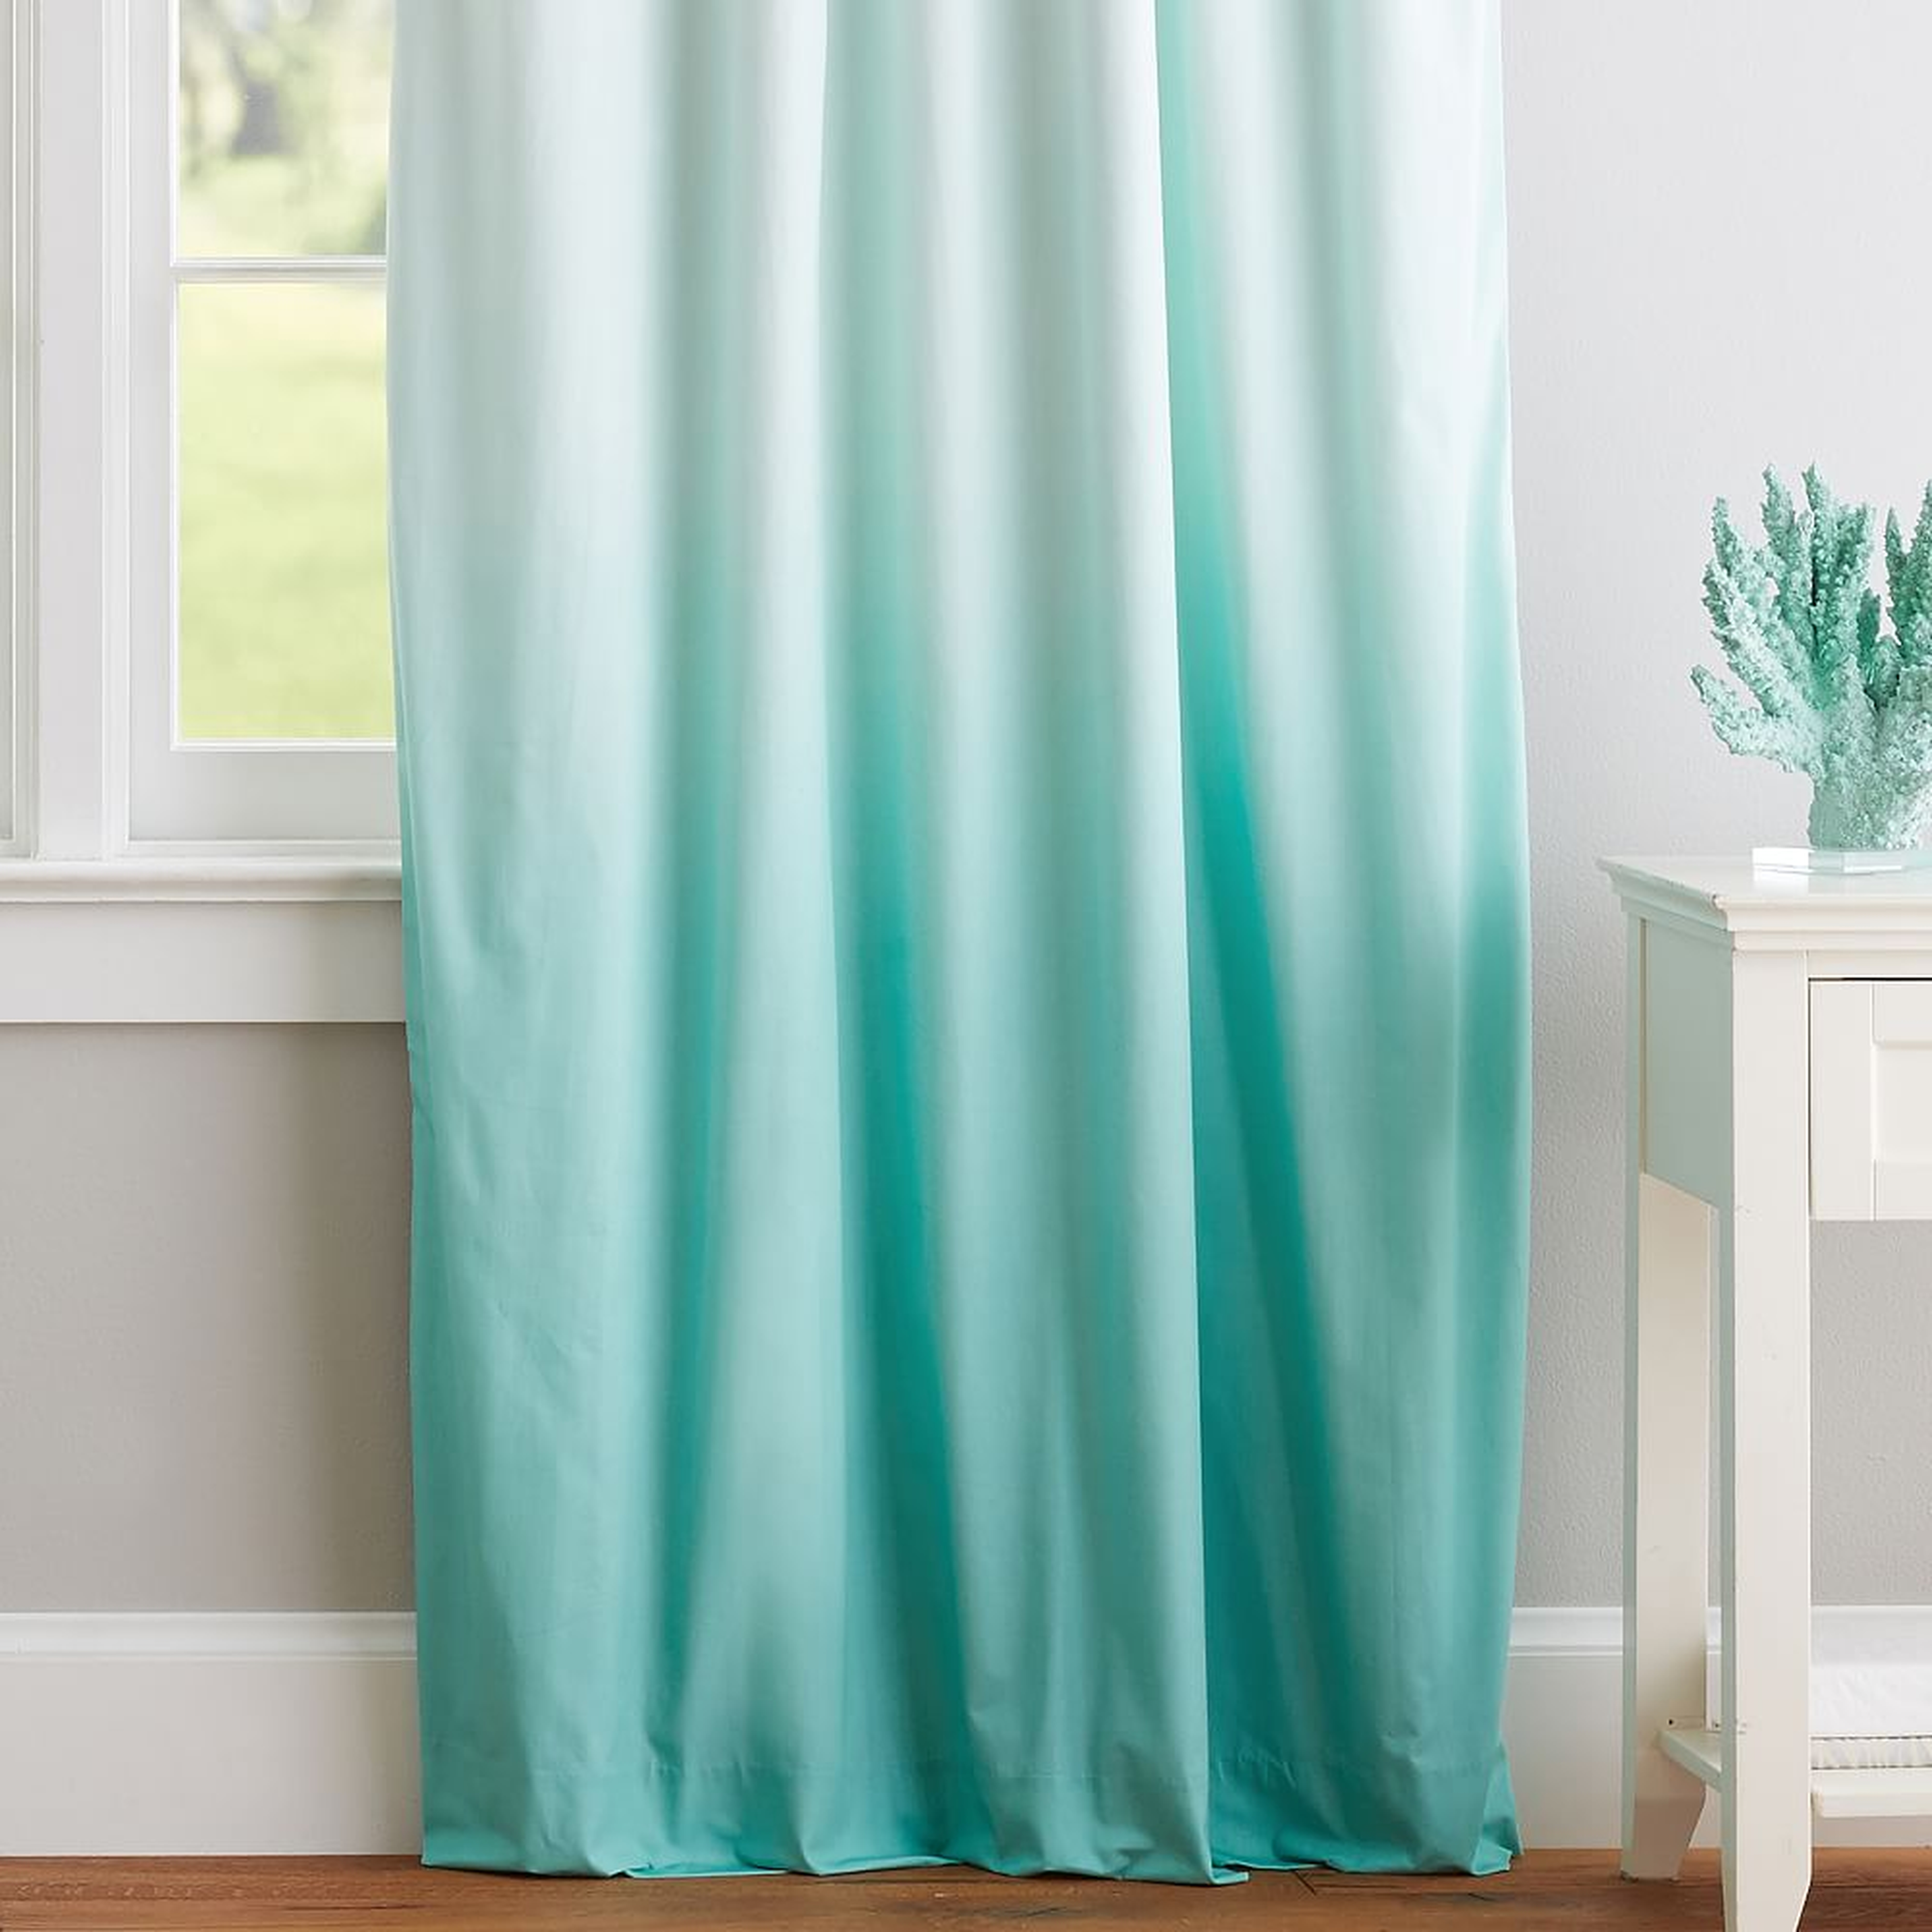 Ombre Blackout Curtain - Set of 2, 96", Turquoise - Pottery Barn Teen